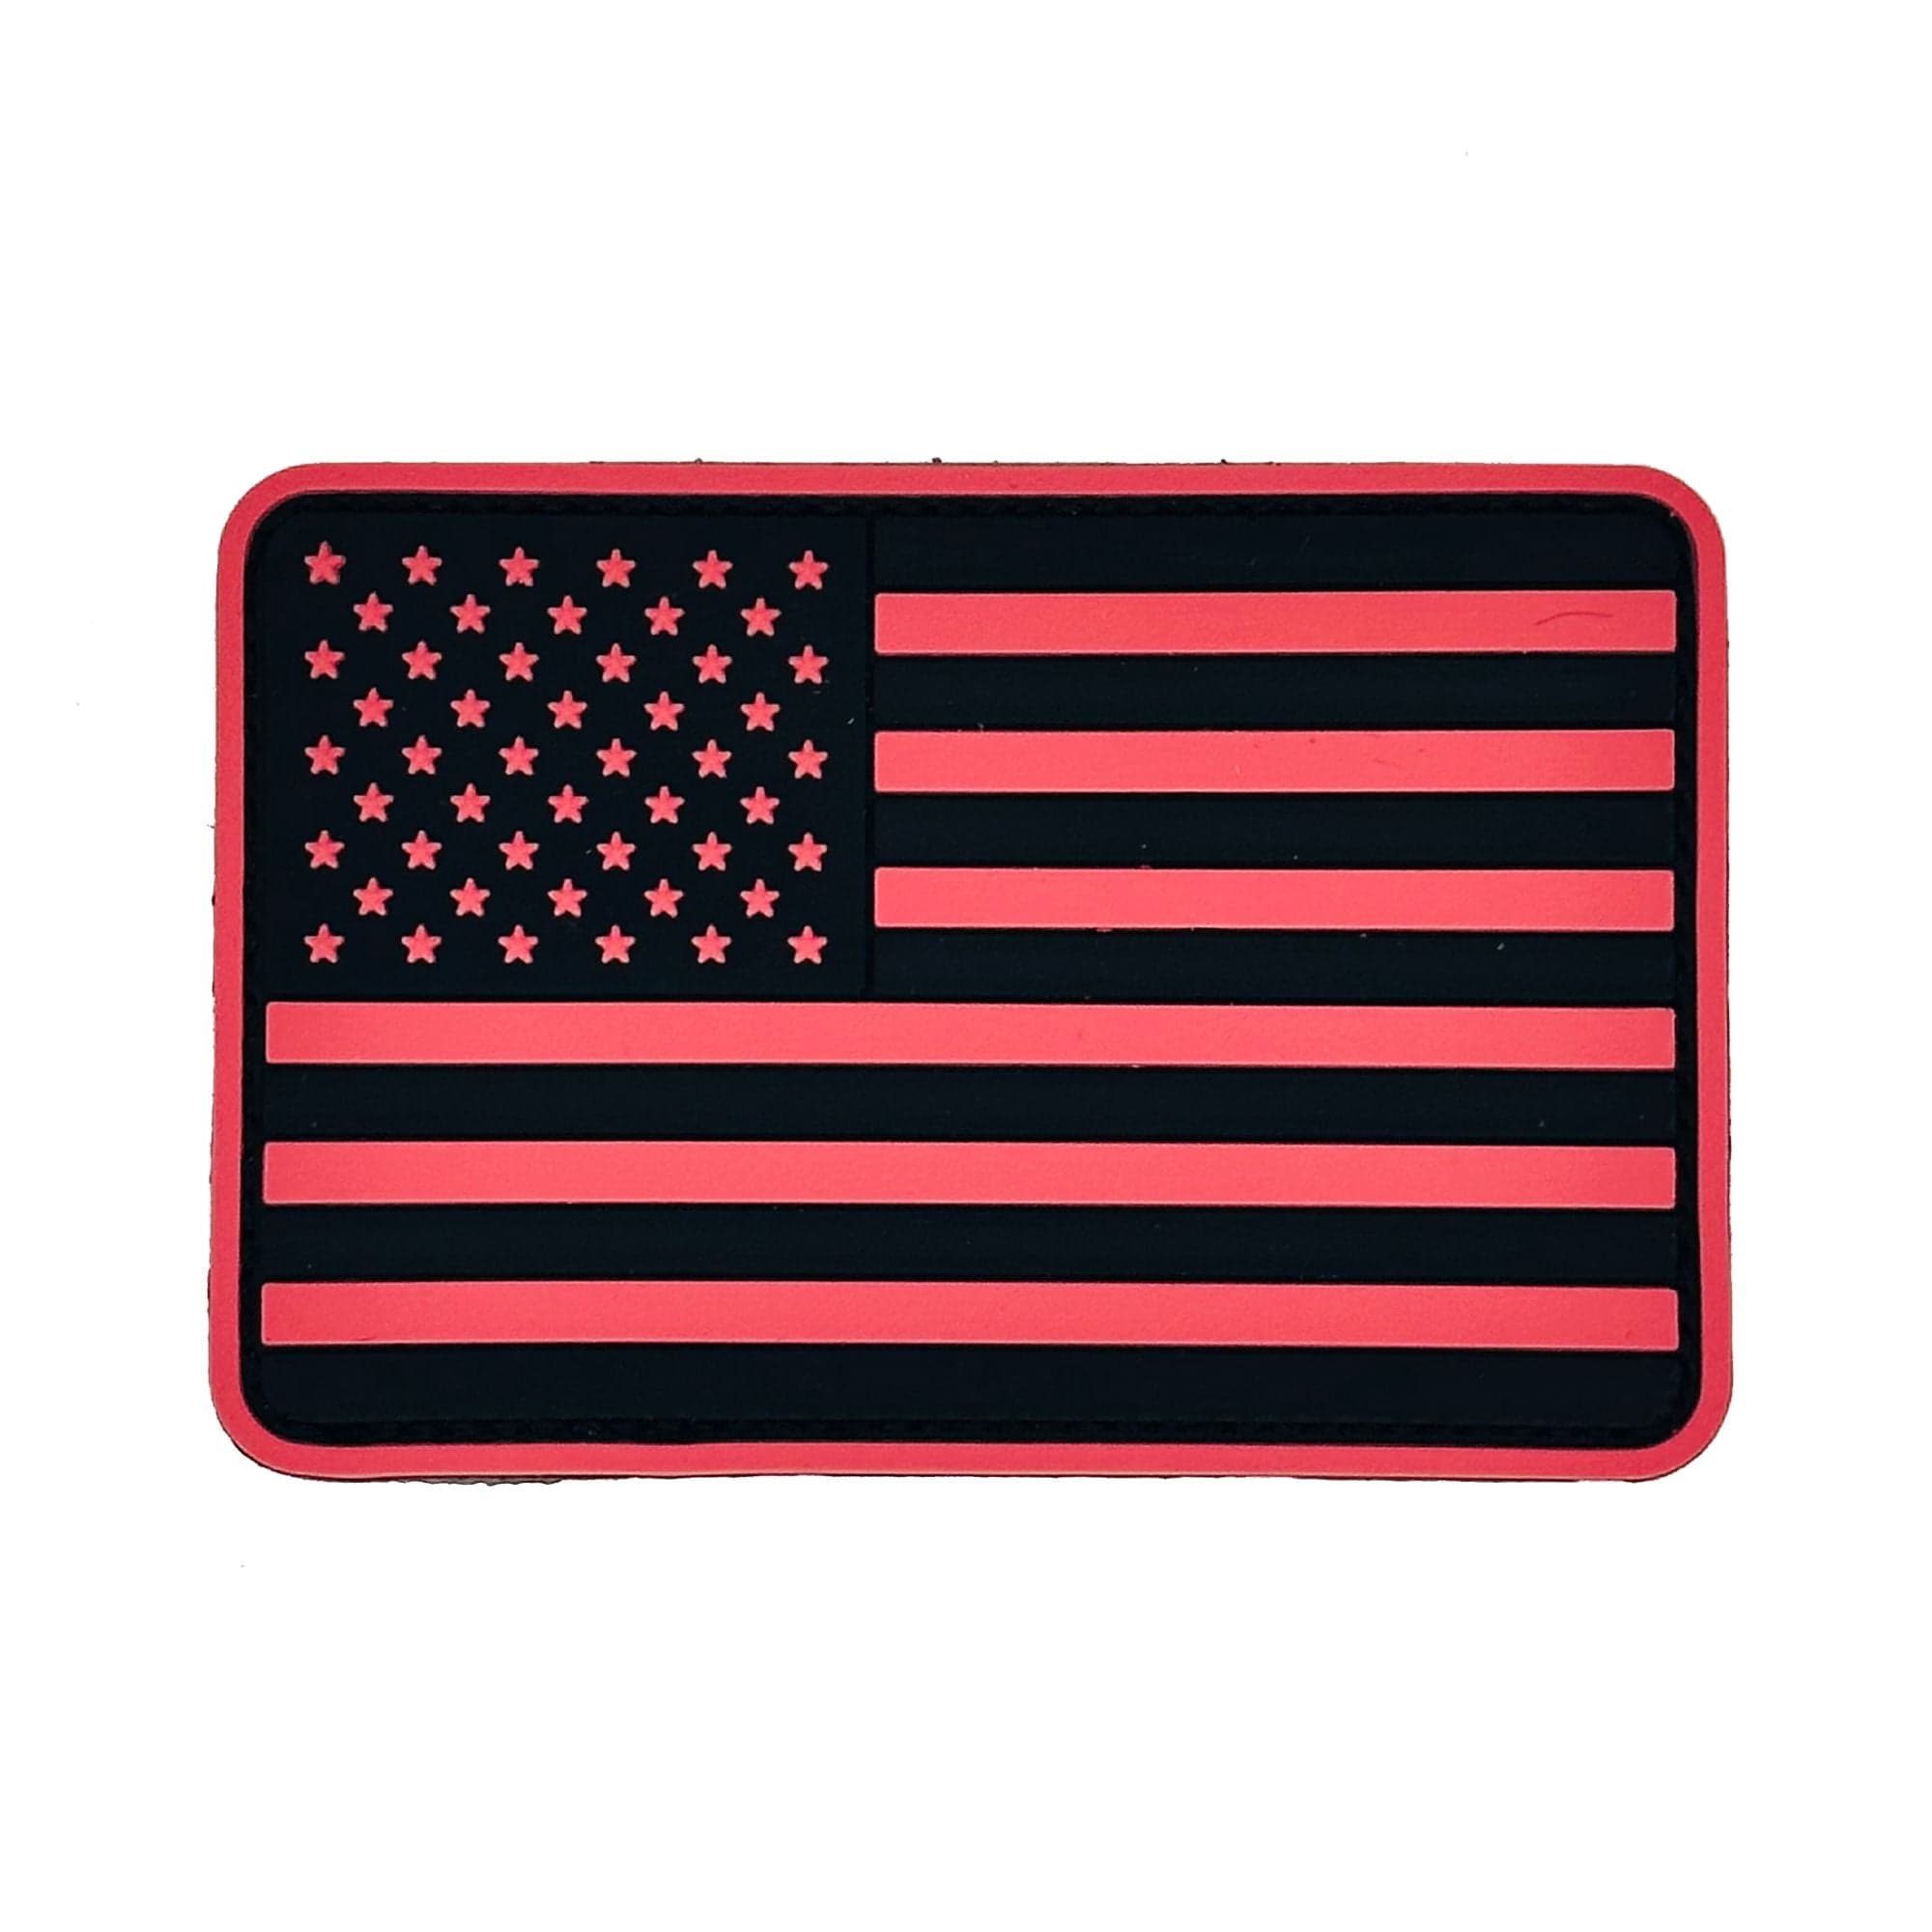 Tactical Gear Junkie Patches Pink US Flag - Rounded Corners - 2"x3" PVC Patch (USA Made)